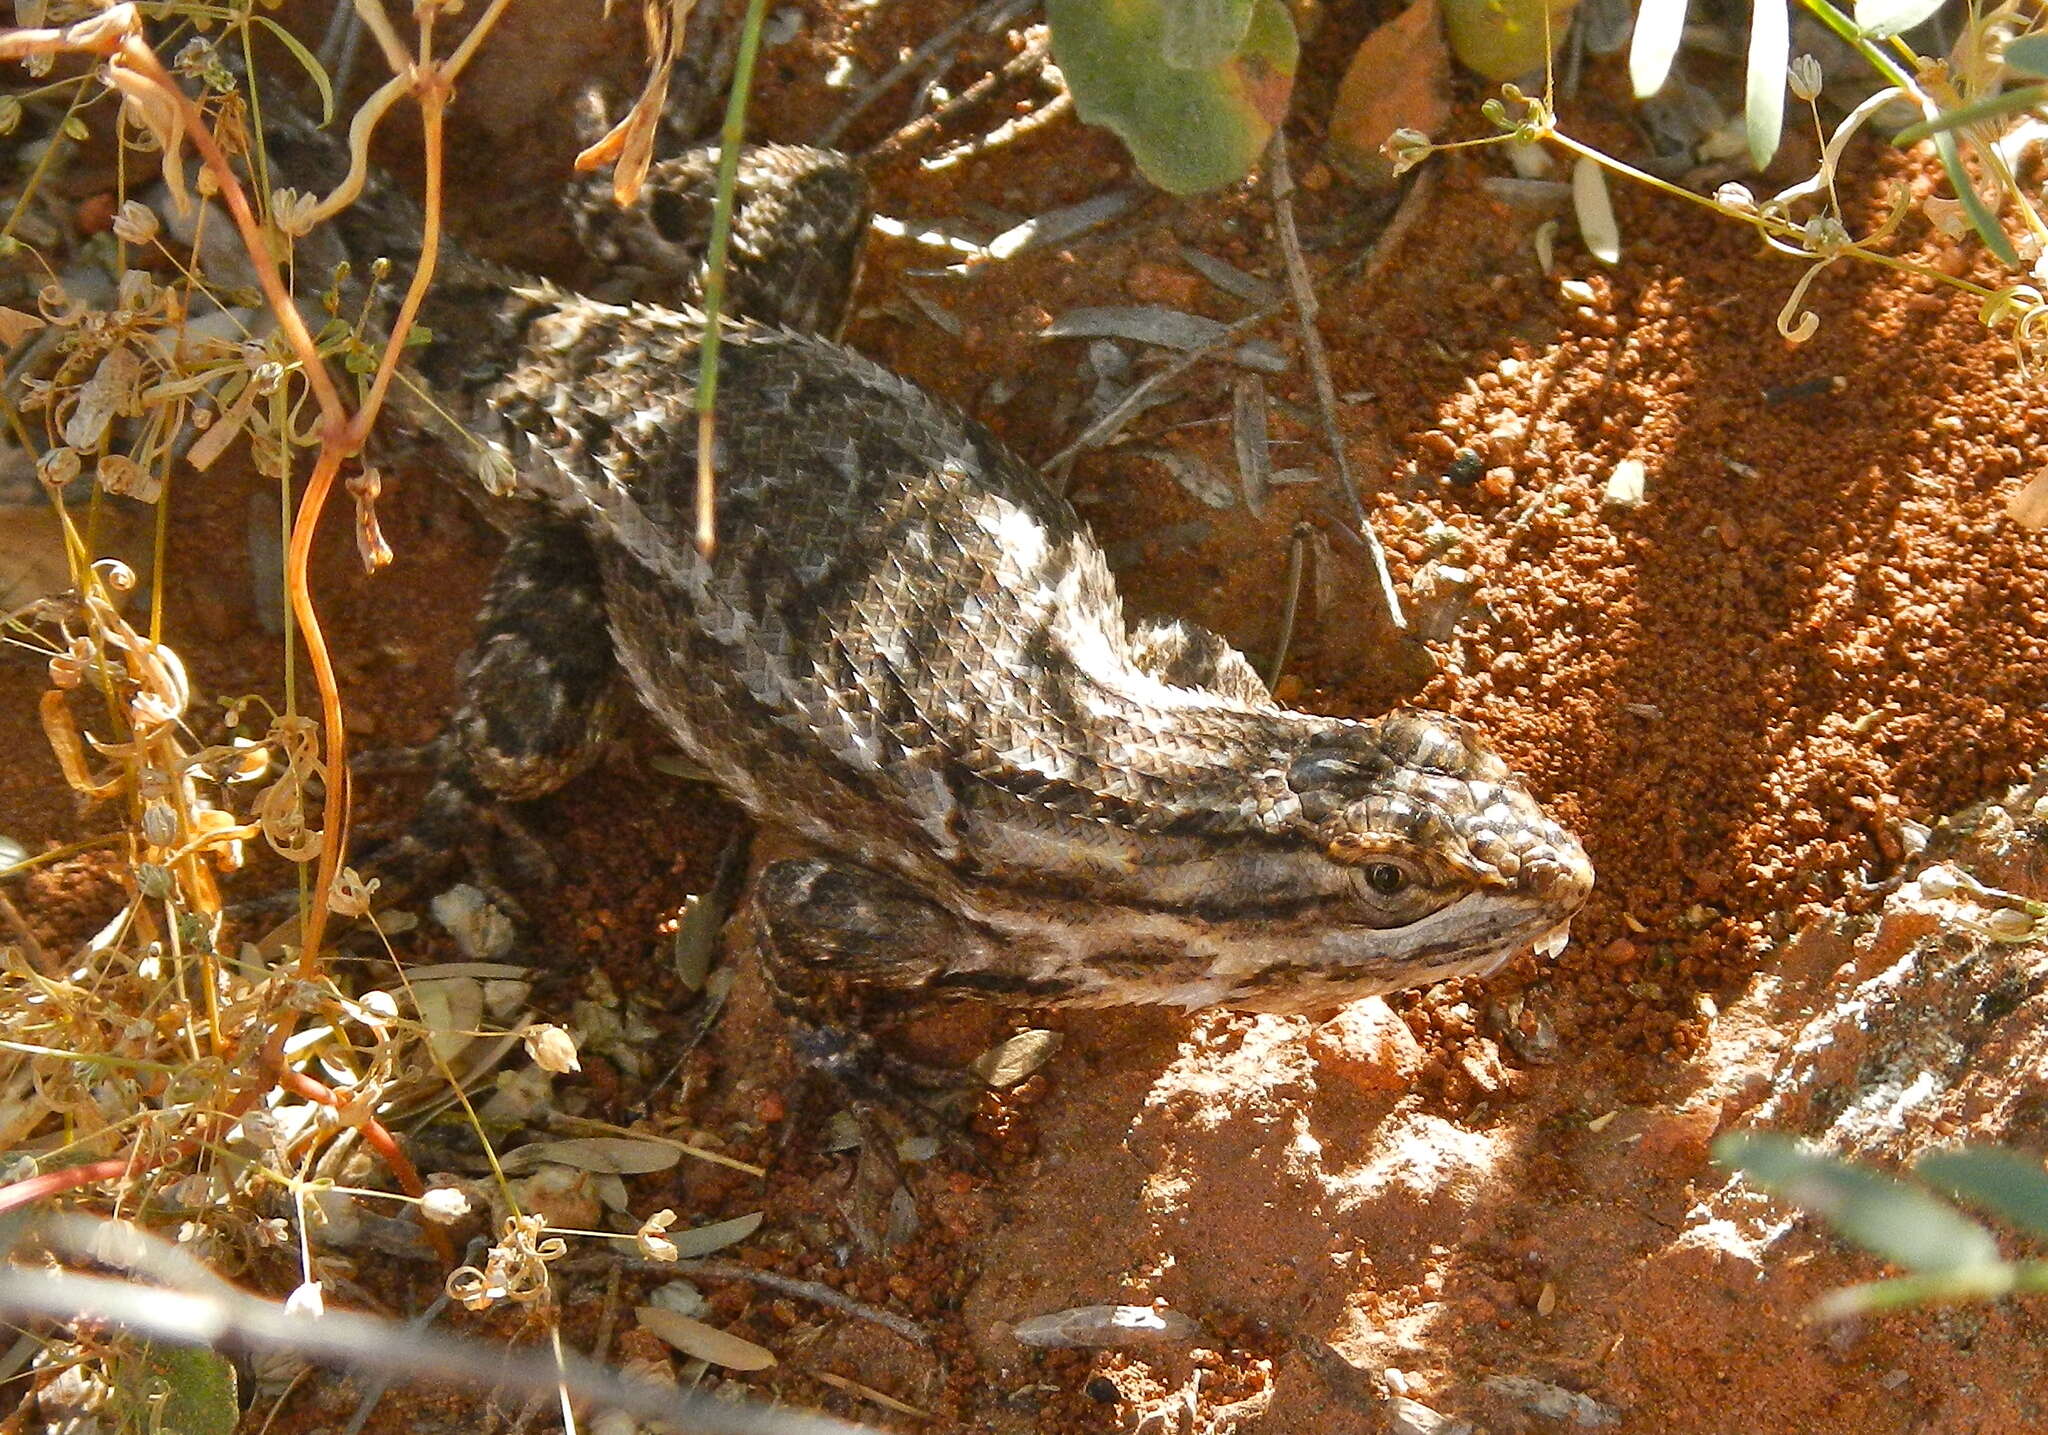 Image of Bell's spiny lizard